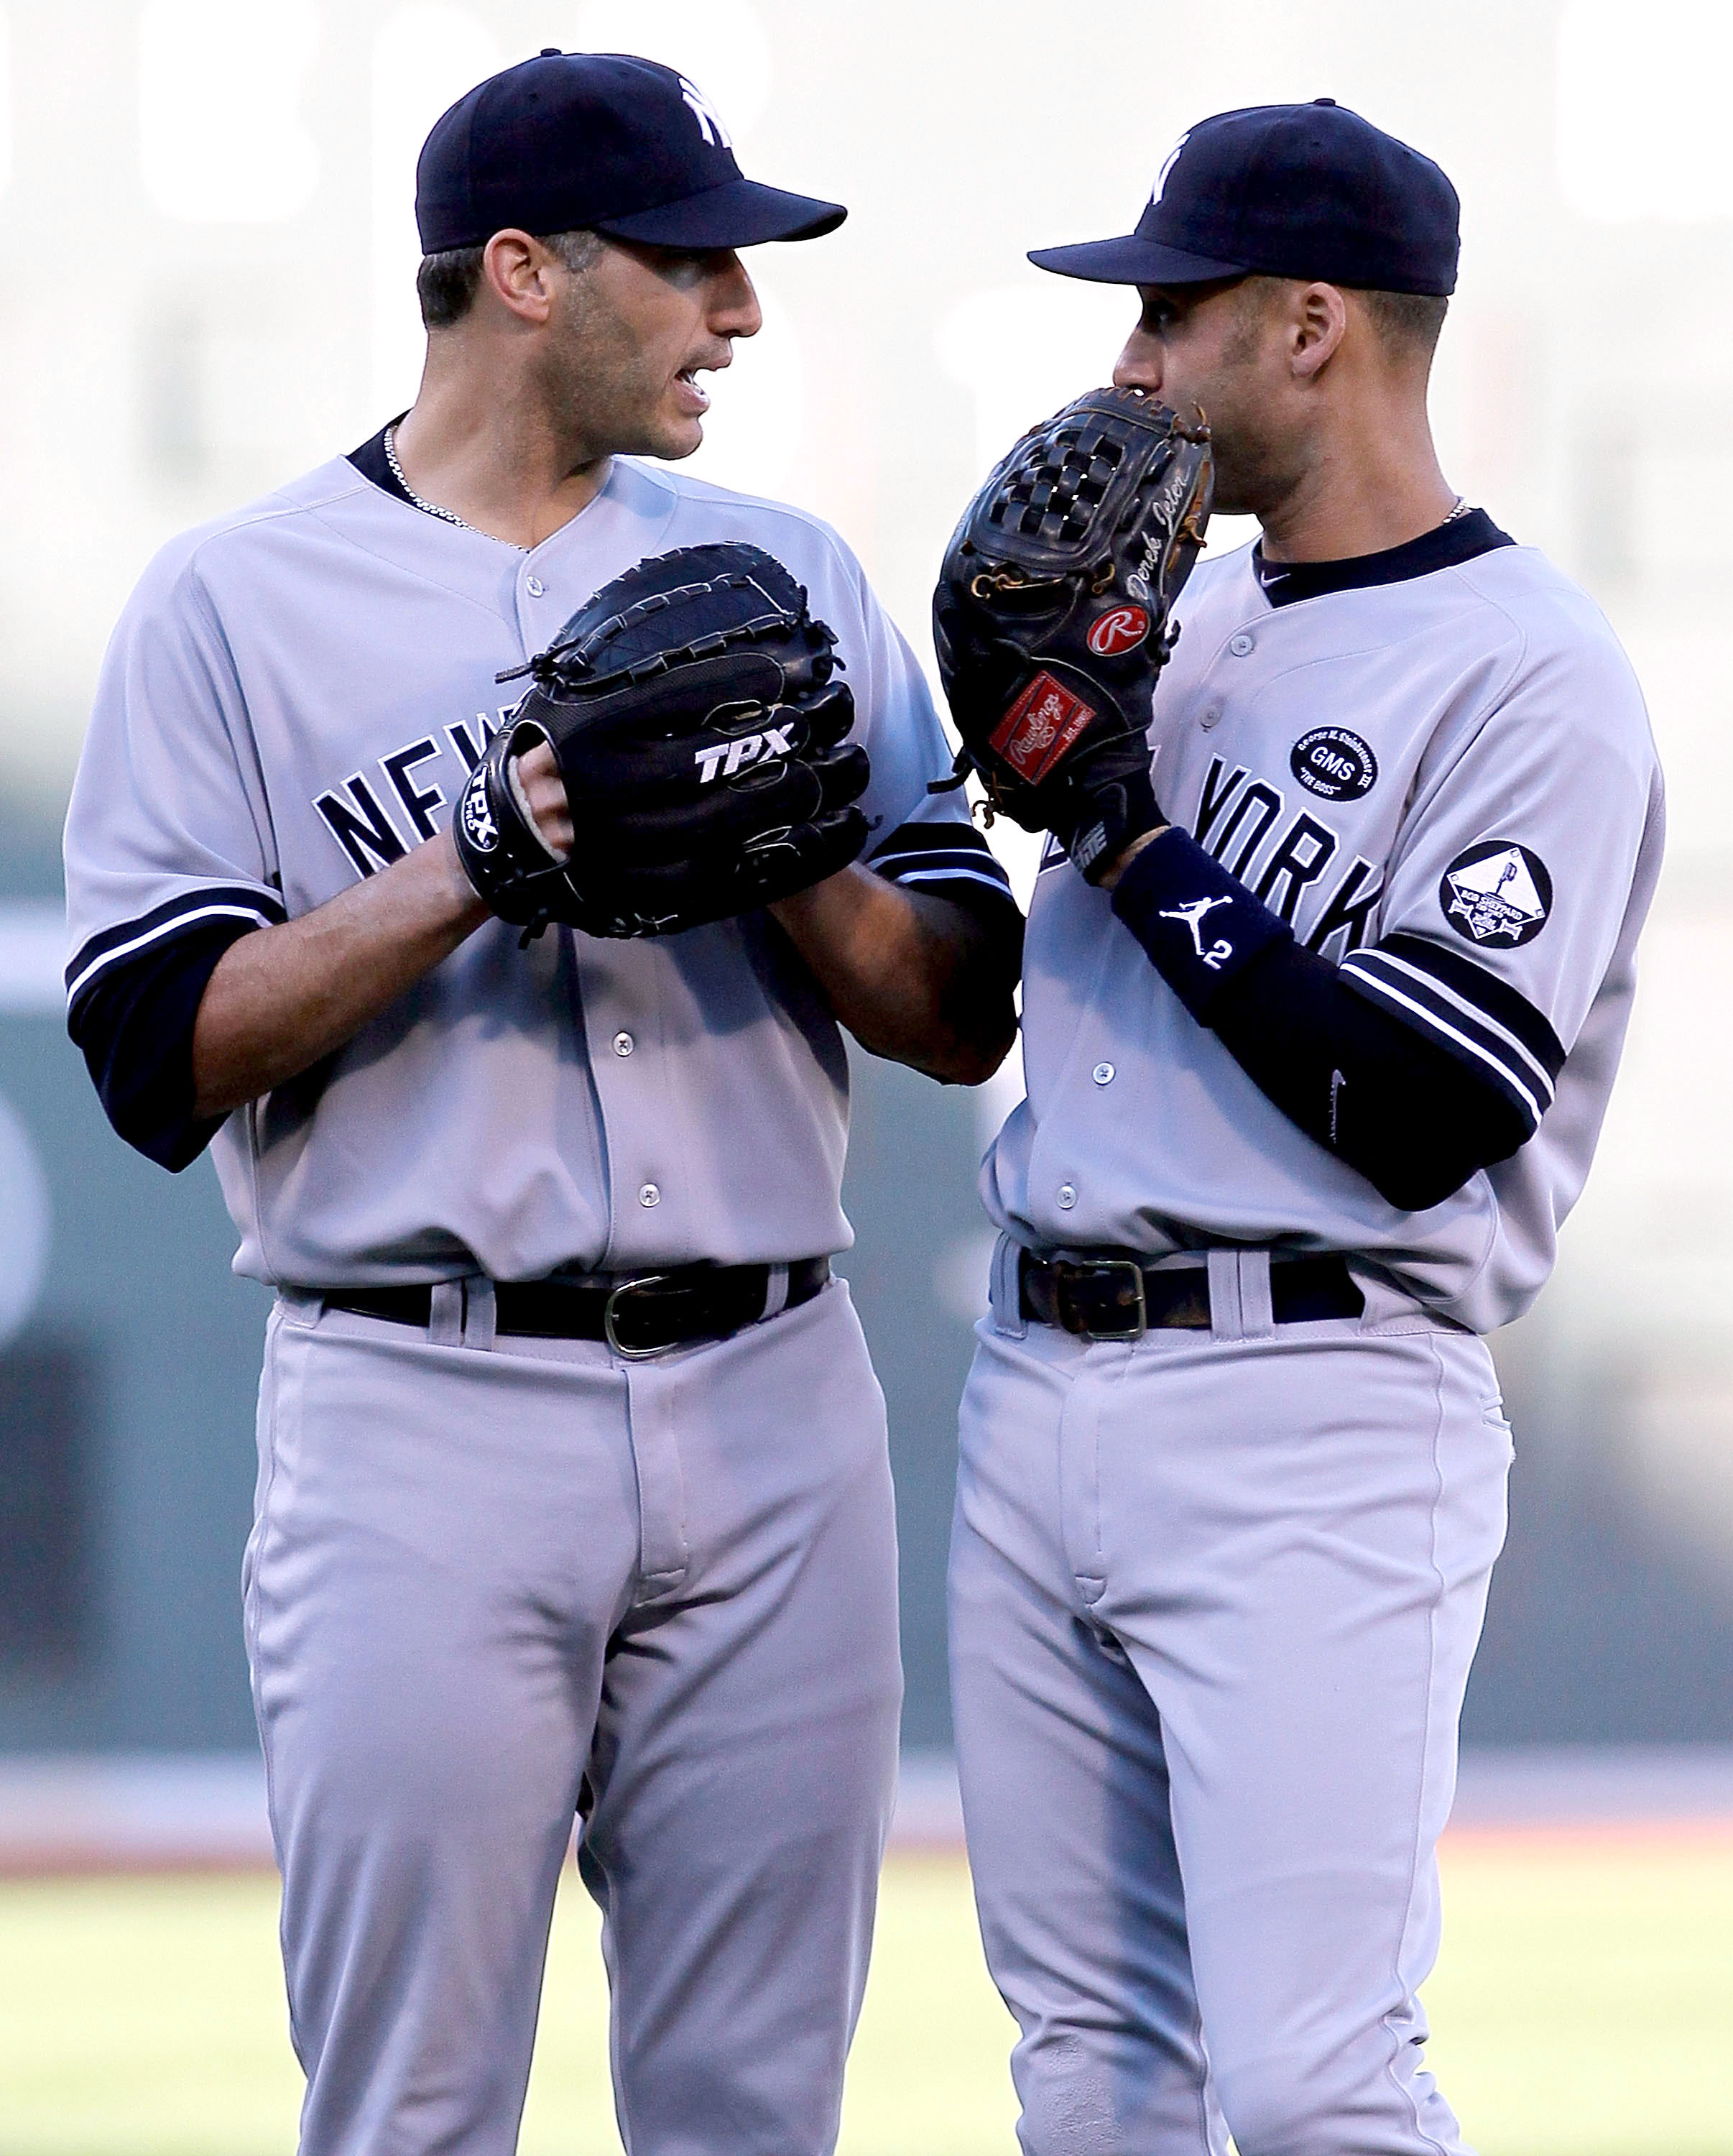 BOSTON - OCTOBER 2:  Andy Pettitte #46 of the New York Yankees has words with teammate Derek Jeter #2 after a run scored in the first inning during the first game of a doubleheader against the Boston Red Sox at Fenway Park October 2, 2010 in Boston, Massa